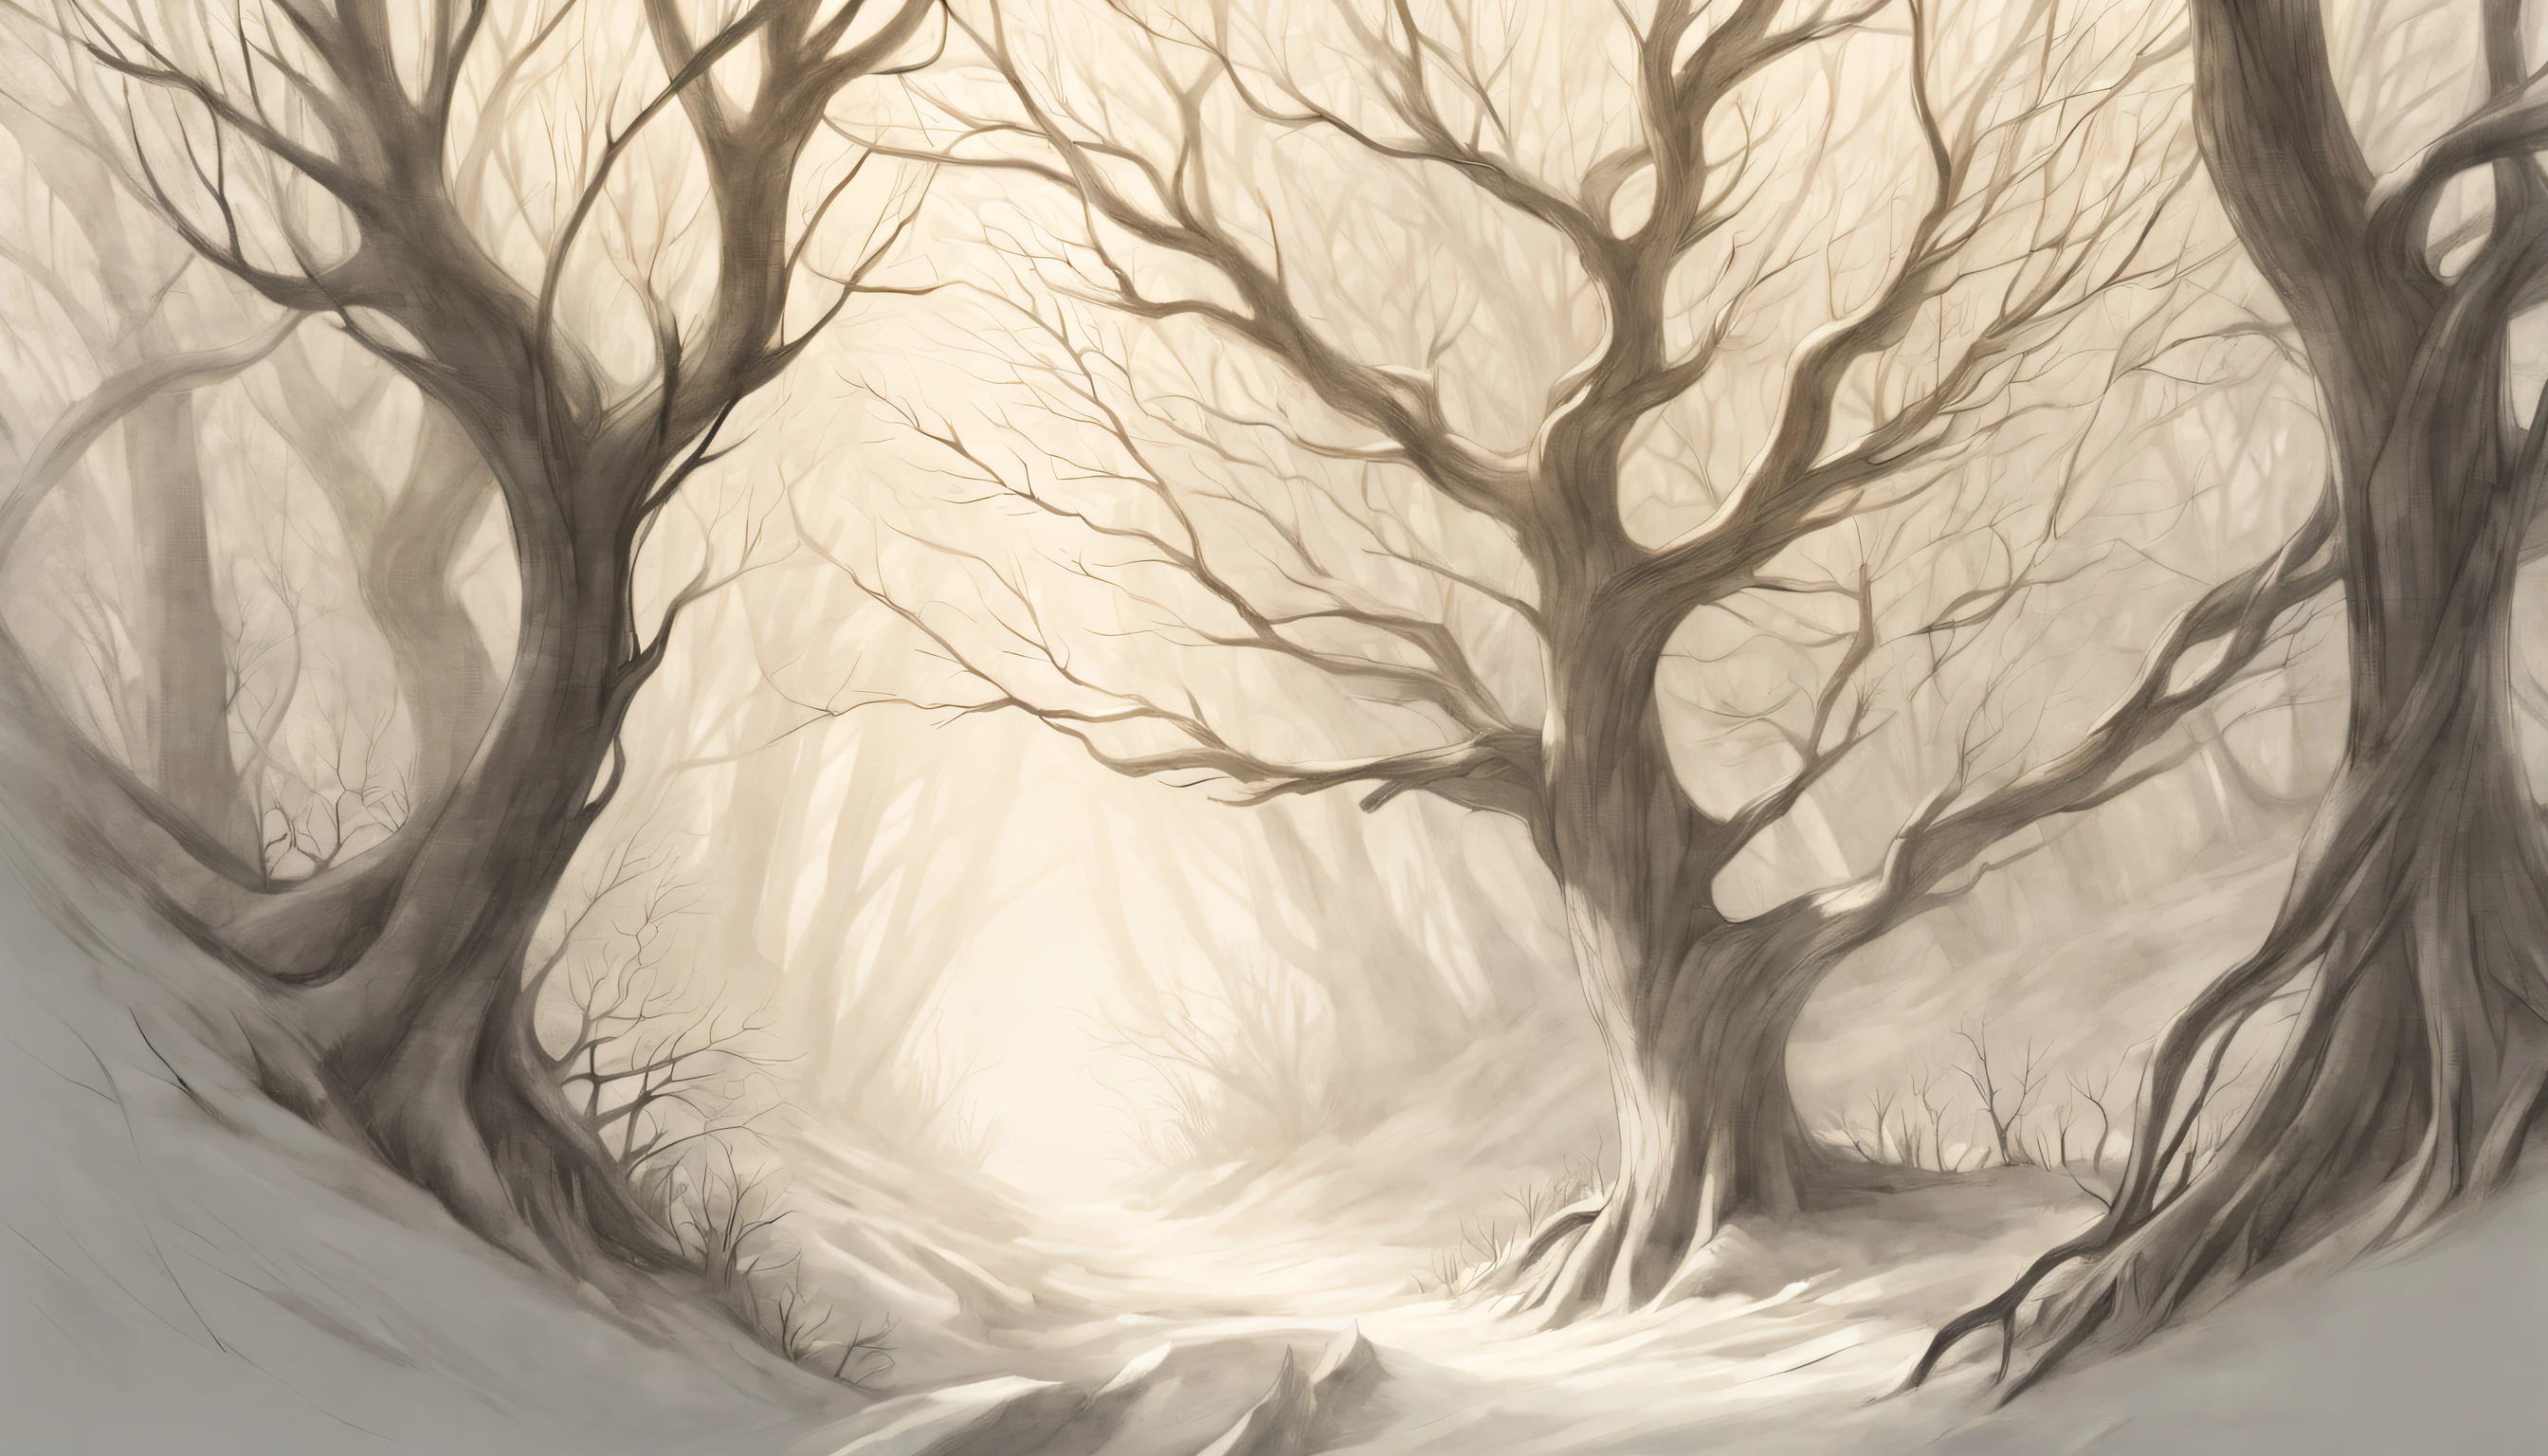 (best quality,4k,8k,highres,masterpiece:1.2),(ultra - detailed)，(realisticlying：1.37).illustratio，(pencil drawing)，at winter season，black andwhite,(ln the forest)，(line art)，organic lines，(crooked branches)，hidden path，(Twisted vines)，(Intertwined tree trunks)，Ethereal atmosphere，game of light and shadow，Subtle gradients、Gradient shadows、Mottled sunlight、tree crown、forest floor、(bark texture)、branch details、(Fine lines)、(stroke technique)、(Sketch-like texture)。Abstract, (Simple vector art), (Hierarchical form).